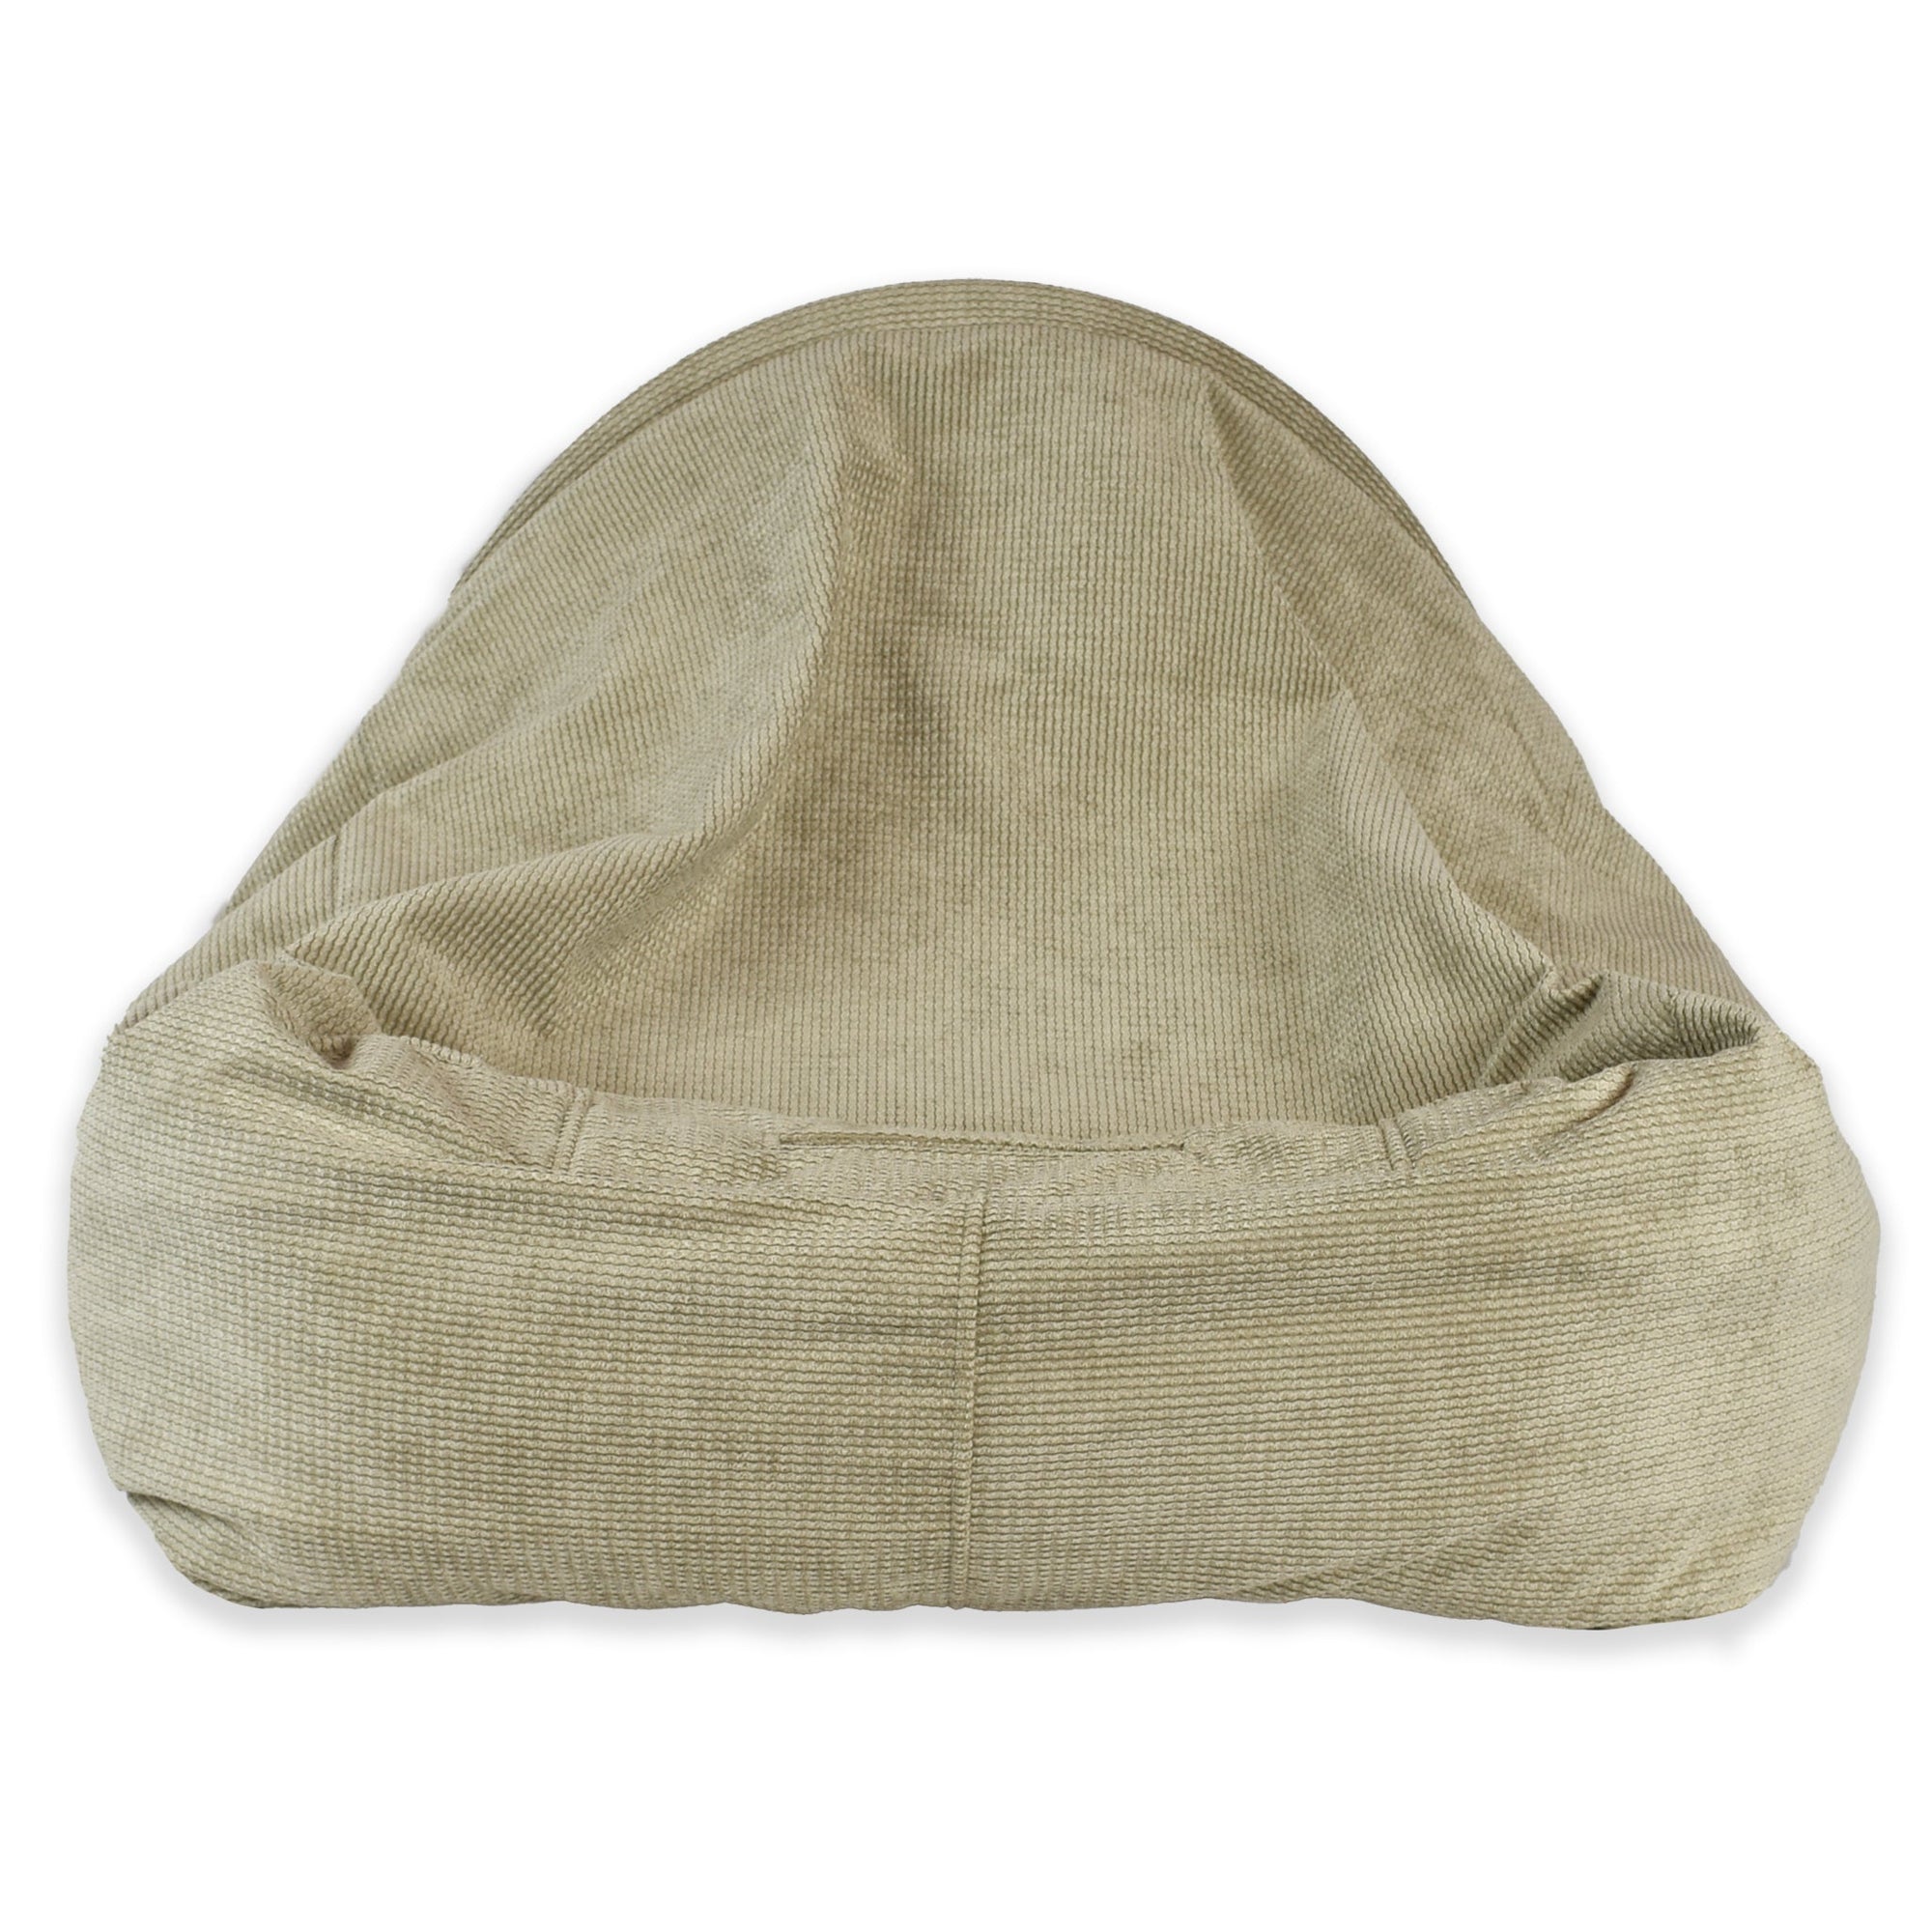 KONA CAVE®  luxury brand snuggle canopy cave cuddle bed. Tan corduroy burrow bed for dogs and cats with removable canopy cave cover. washable. Patented and Unique air-opening in the back of the bed to ensure your pet gets enough air at all times, keeping them safe. 